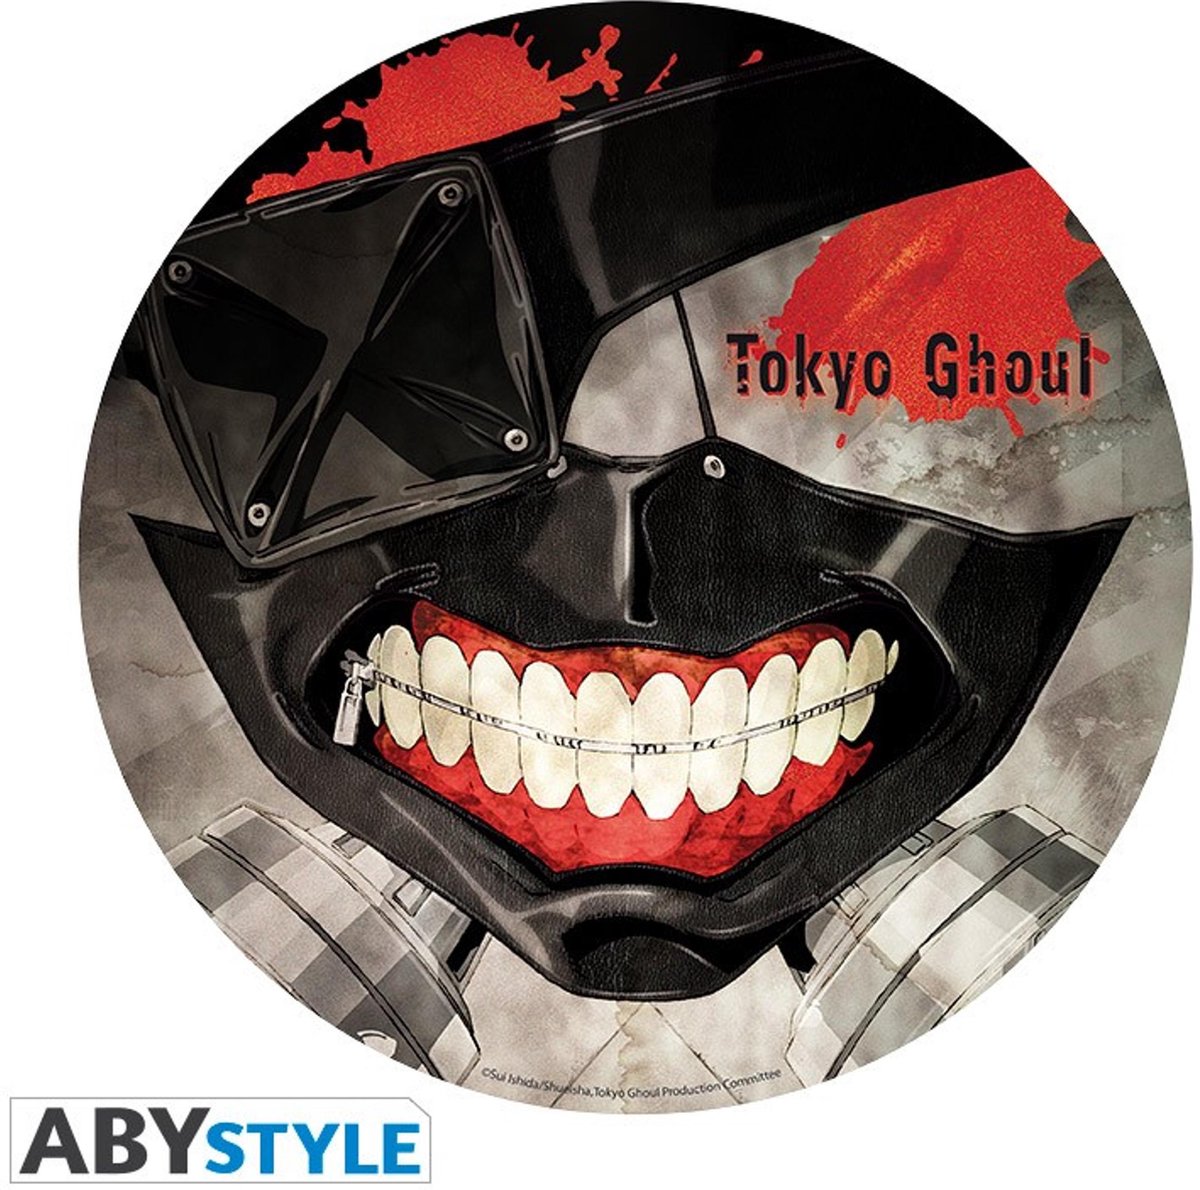 Tokyo Ghoul - Flexible Mouse Pad - Mask